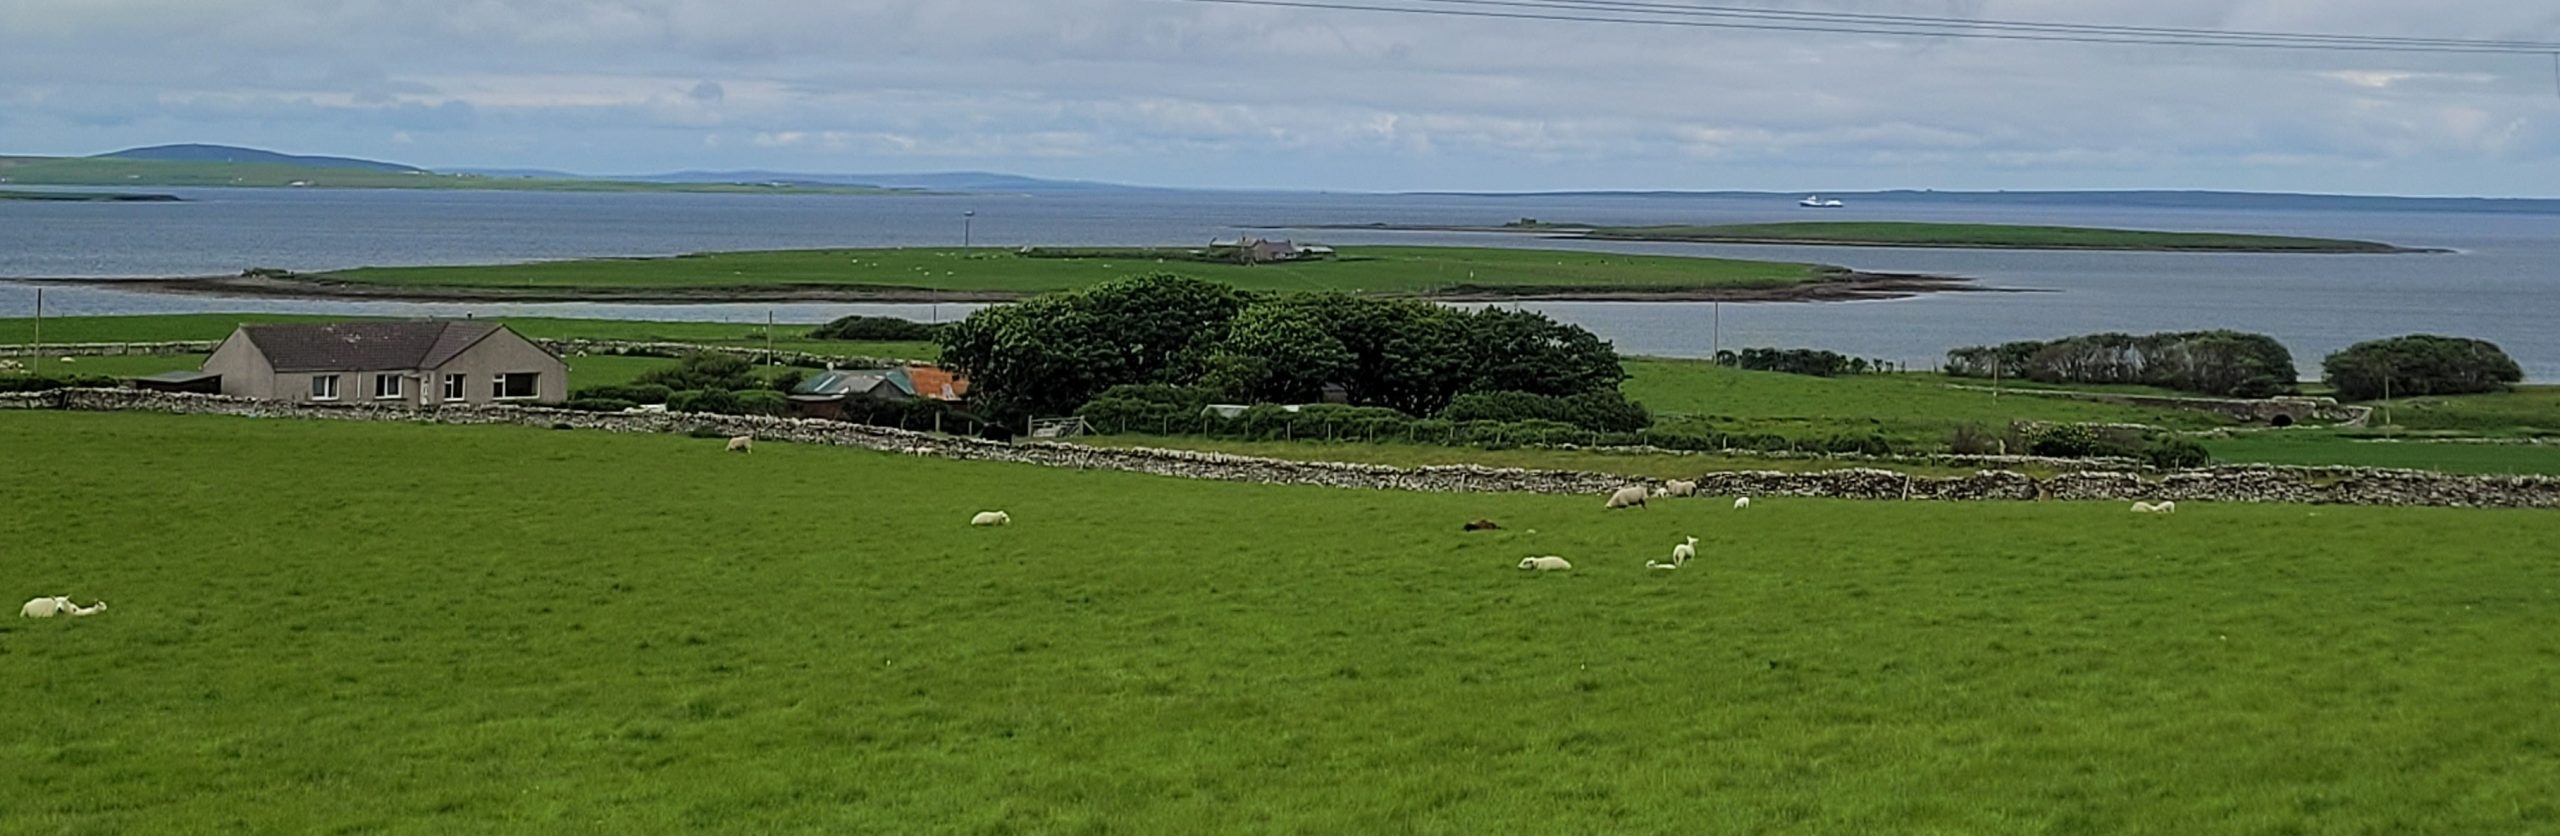 Colour photograph taken across a low decline over green fields into a sea bay with two islands in Orkney.